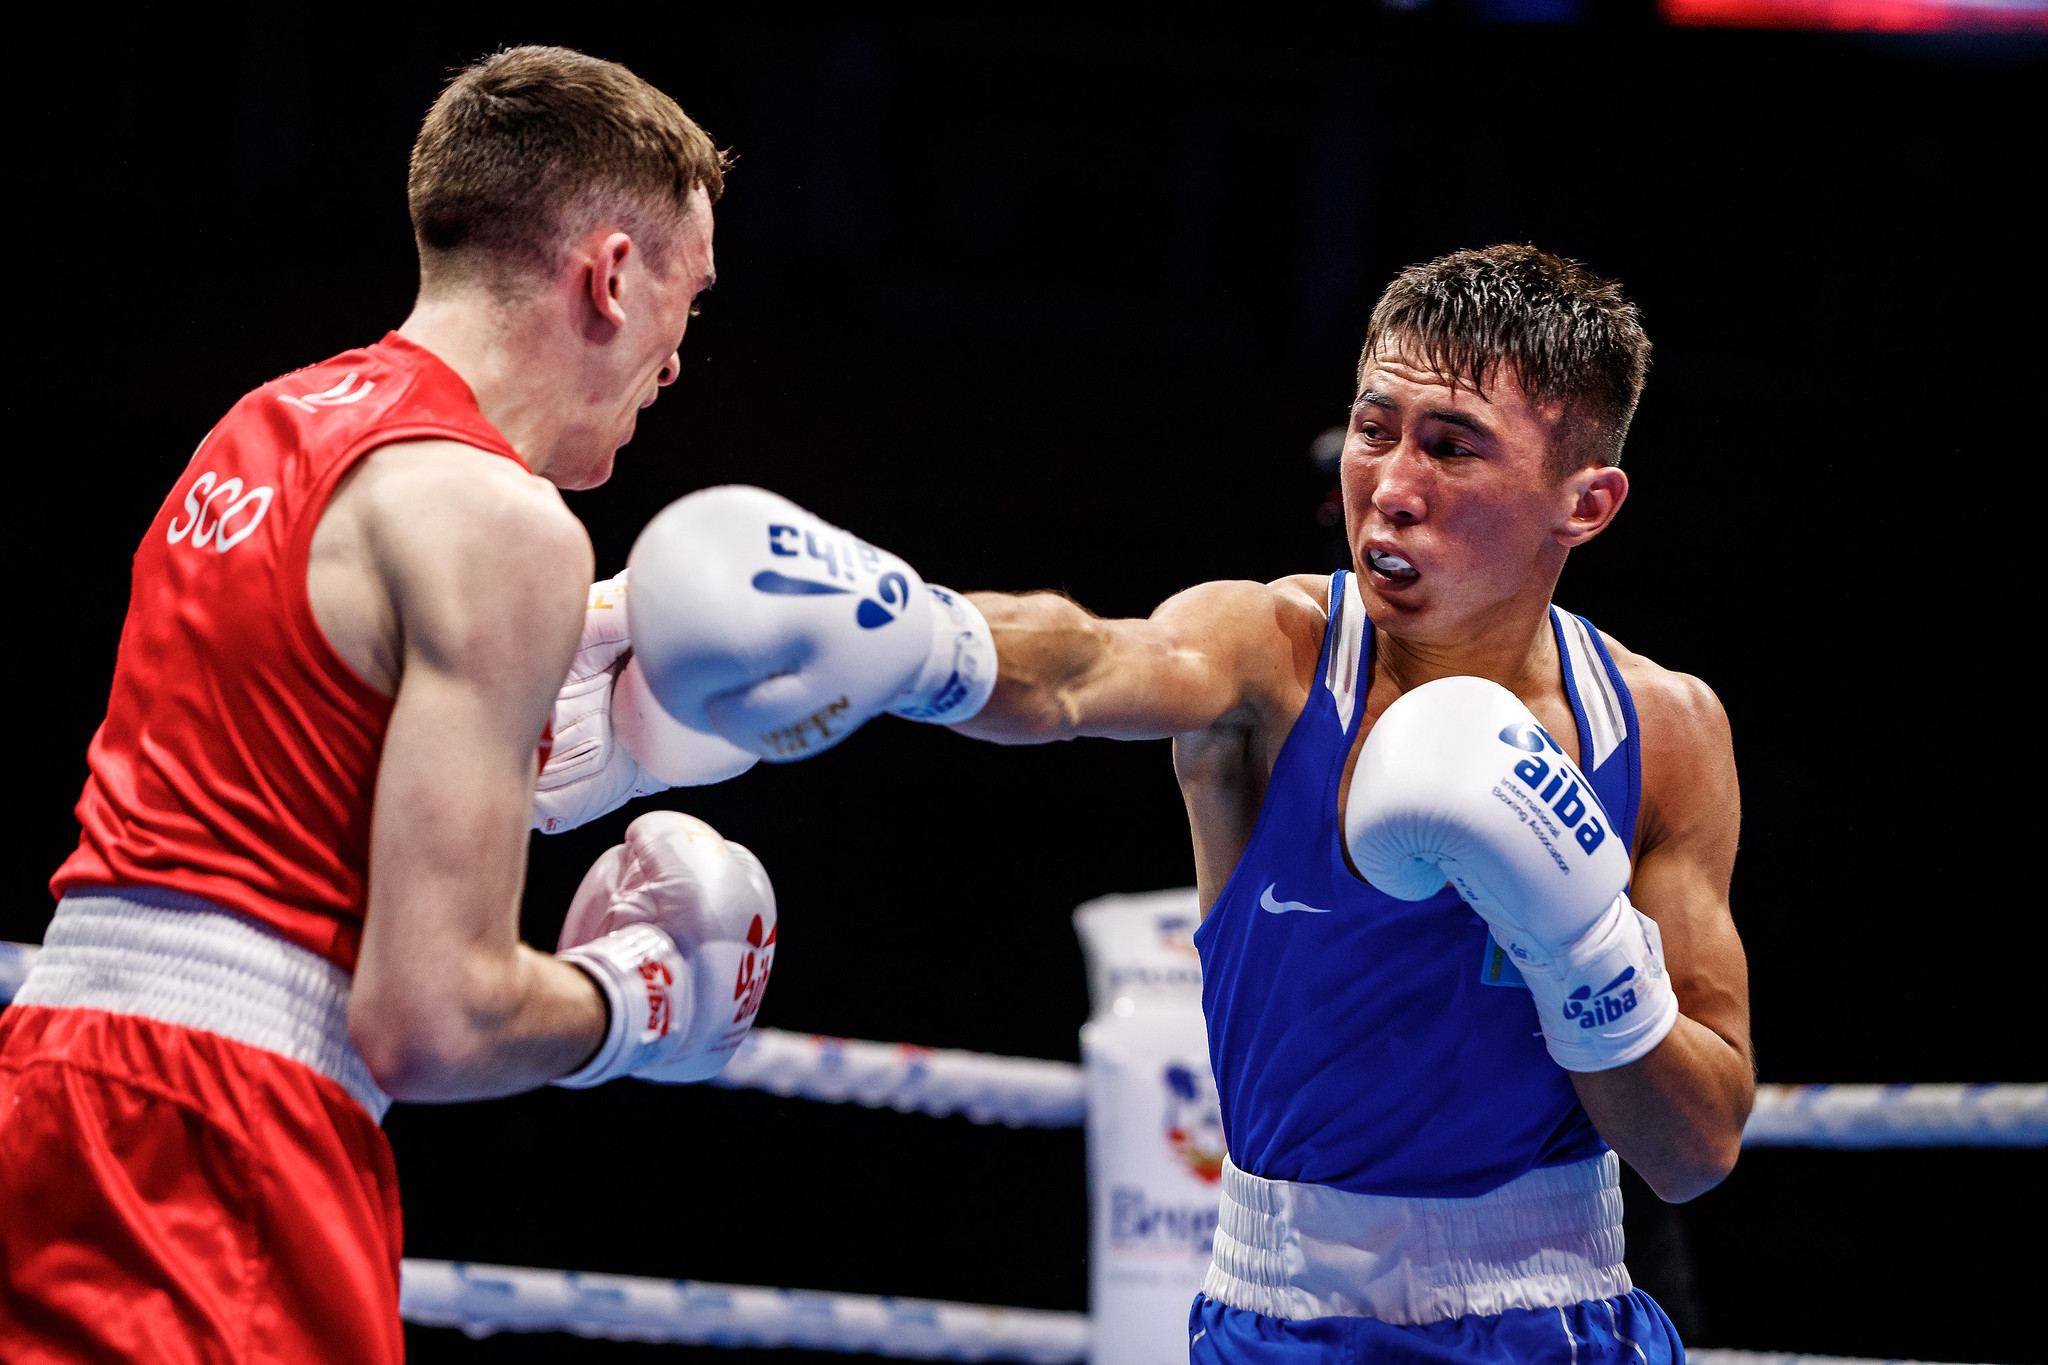 Kazakhstan's Makhmud Sabyrkhan is through in the under-54kg following victory over Scotland's Matty McHale ©AIBA